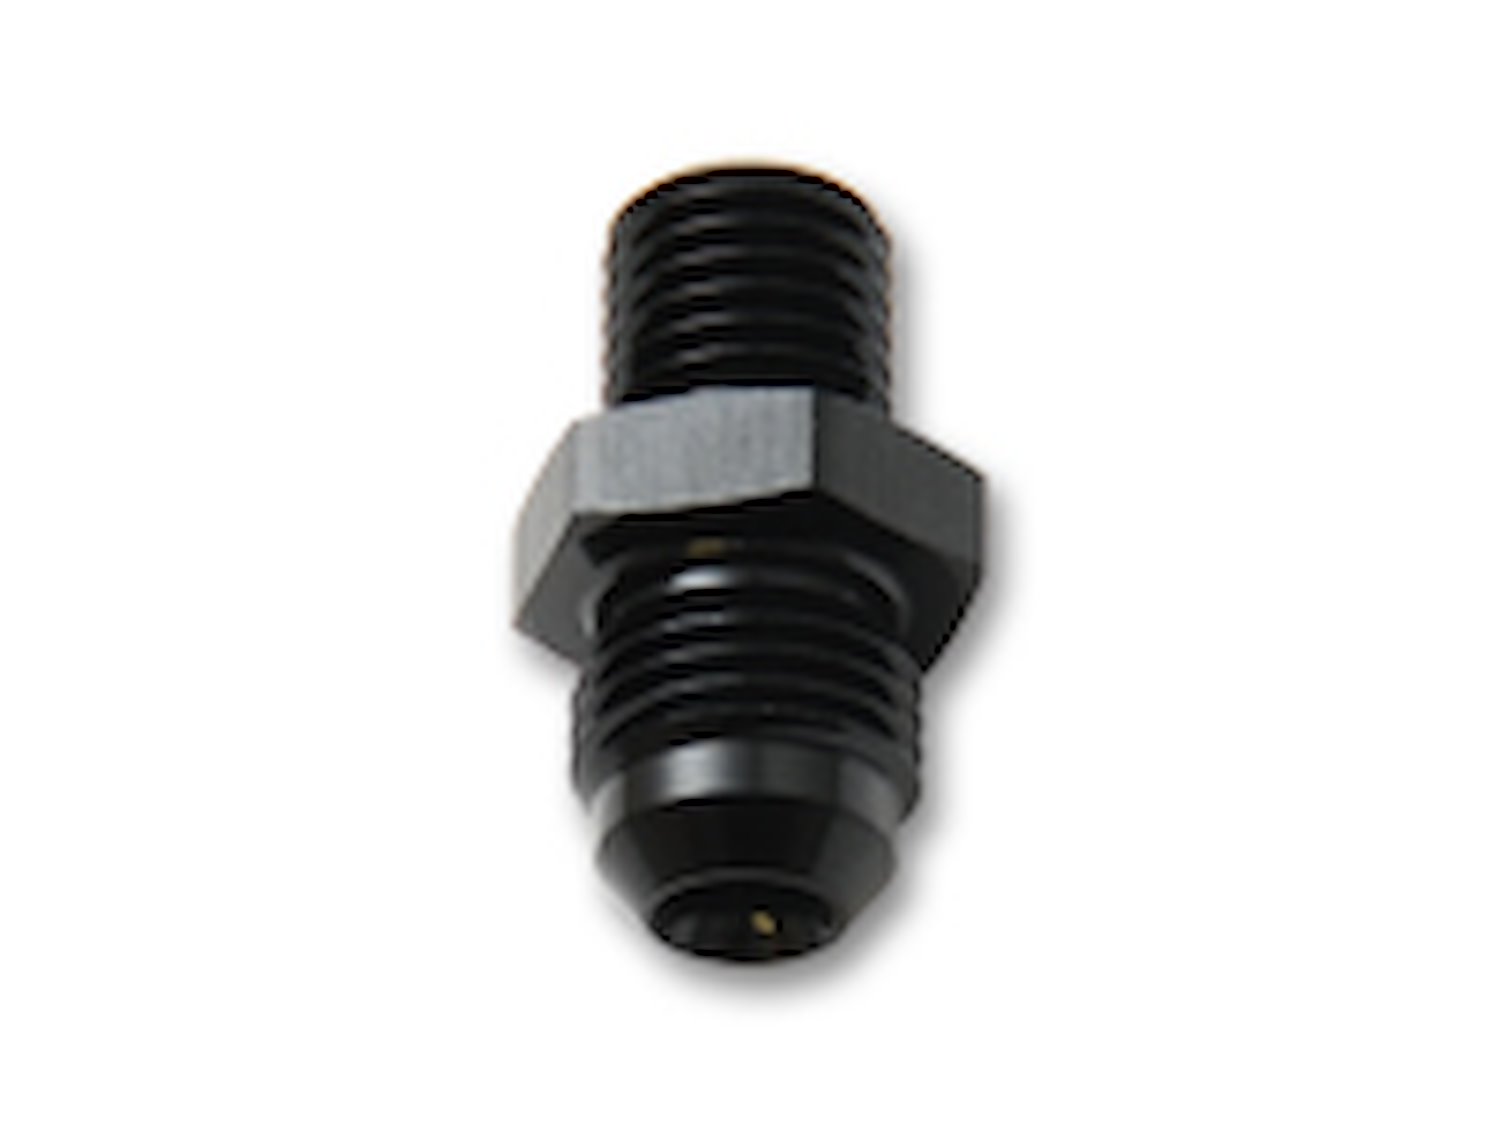 -16AN to 22mm x 1.5 Metric Straight Adapter